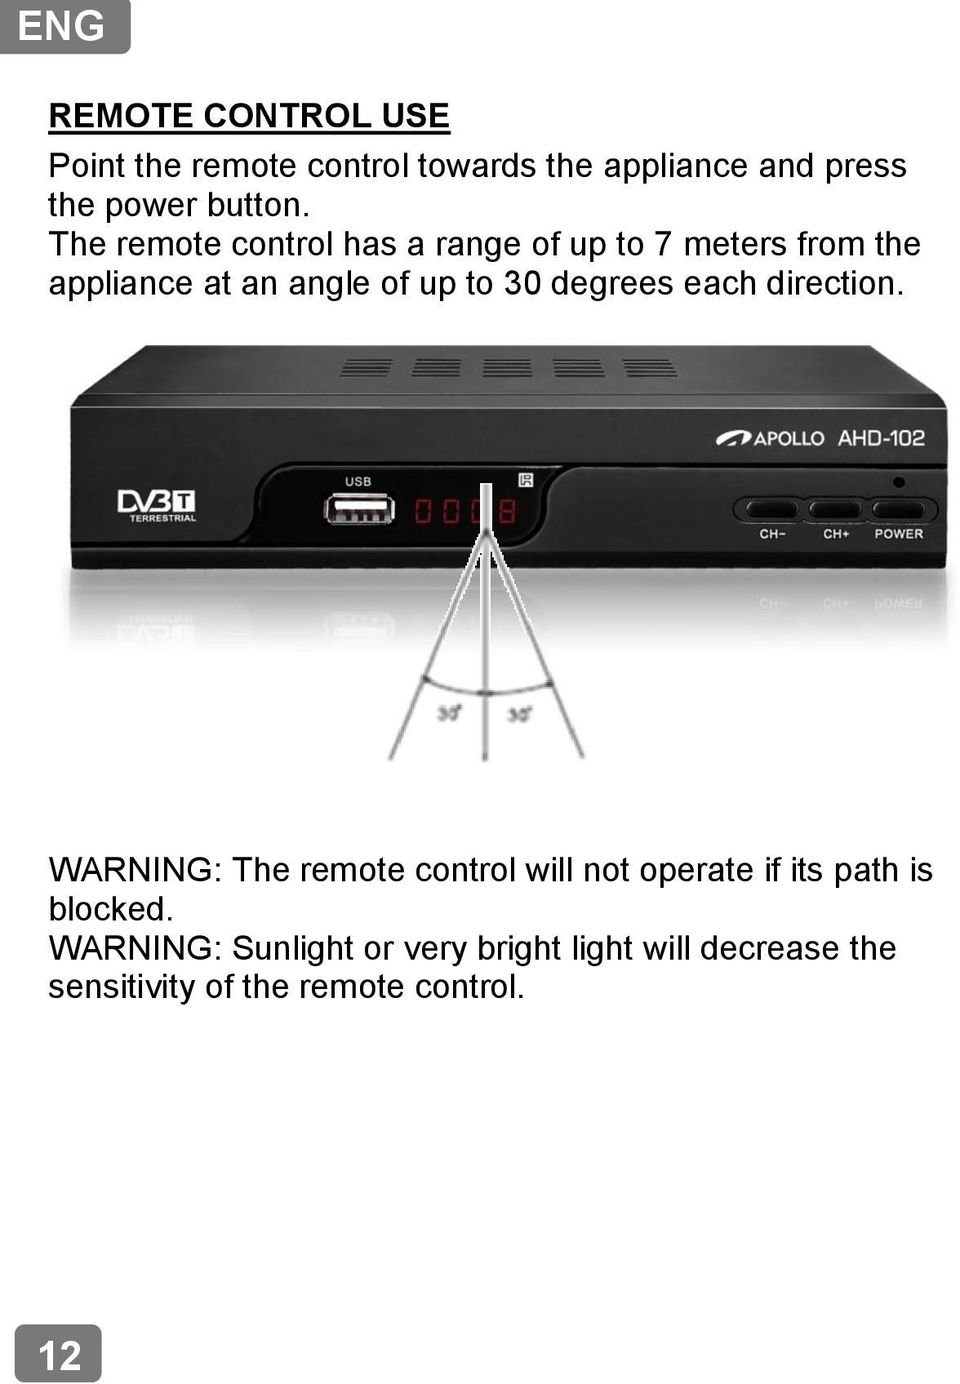 The remote control has a range of up to 7 meters from the appliance at an angle of up to 30